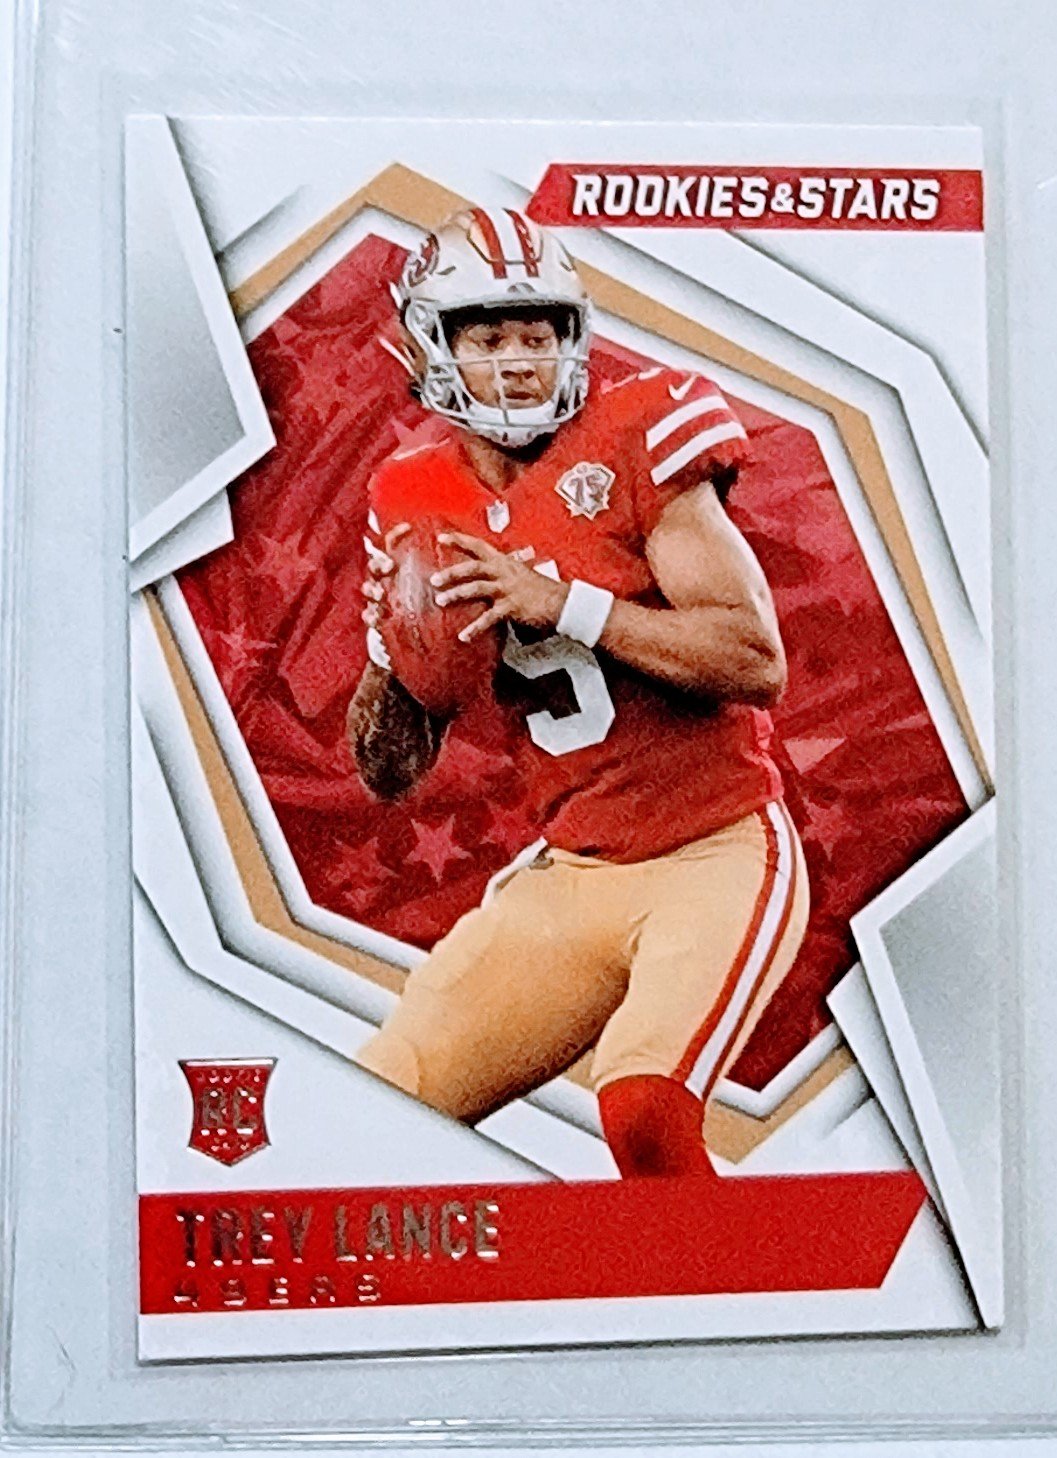 2021 Panini Rookies and Star Trey Lance Rookie Football Card AVM1 simple Xclusive Collectibles   